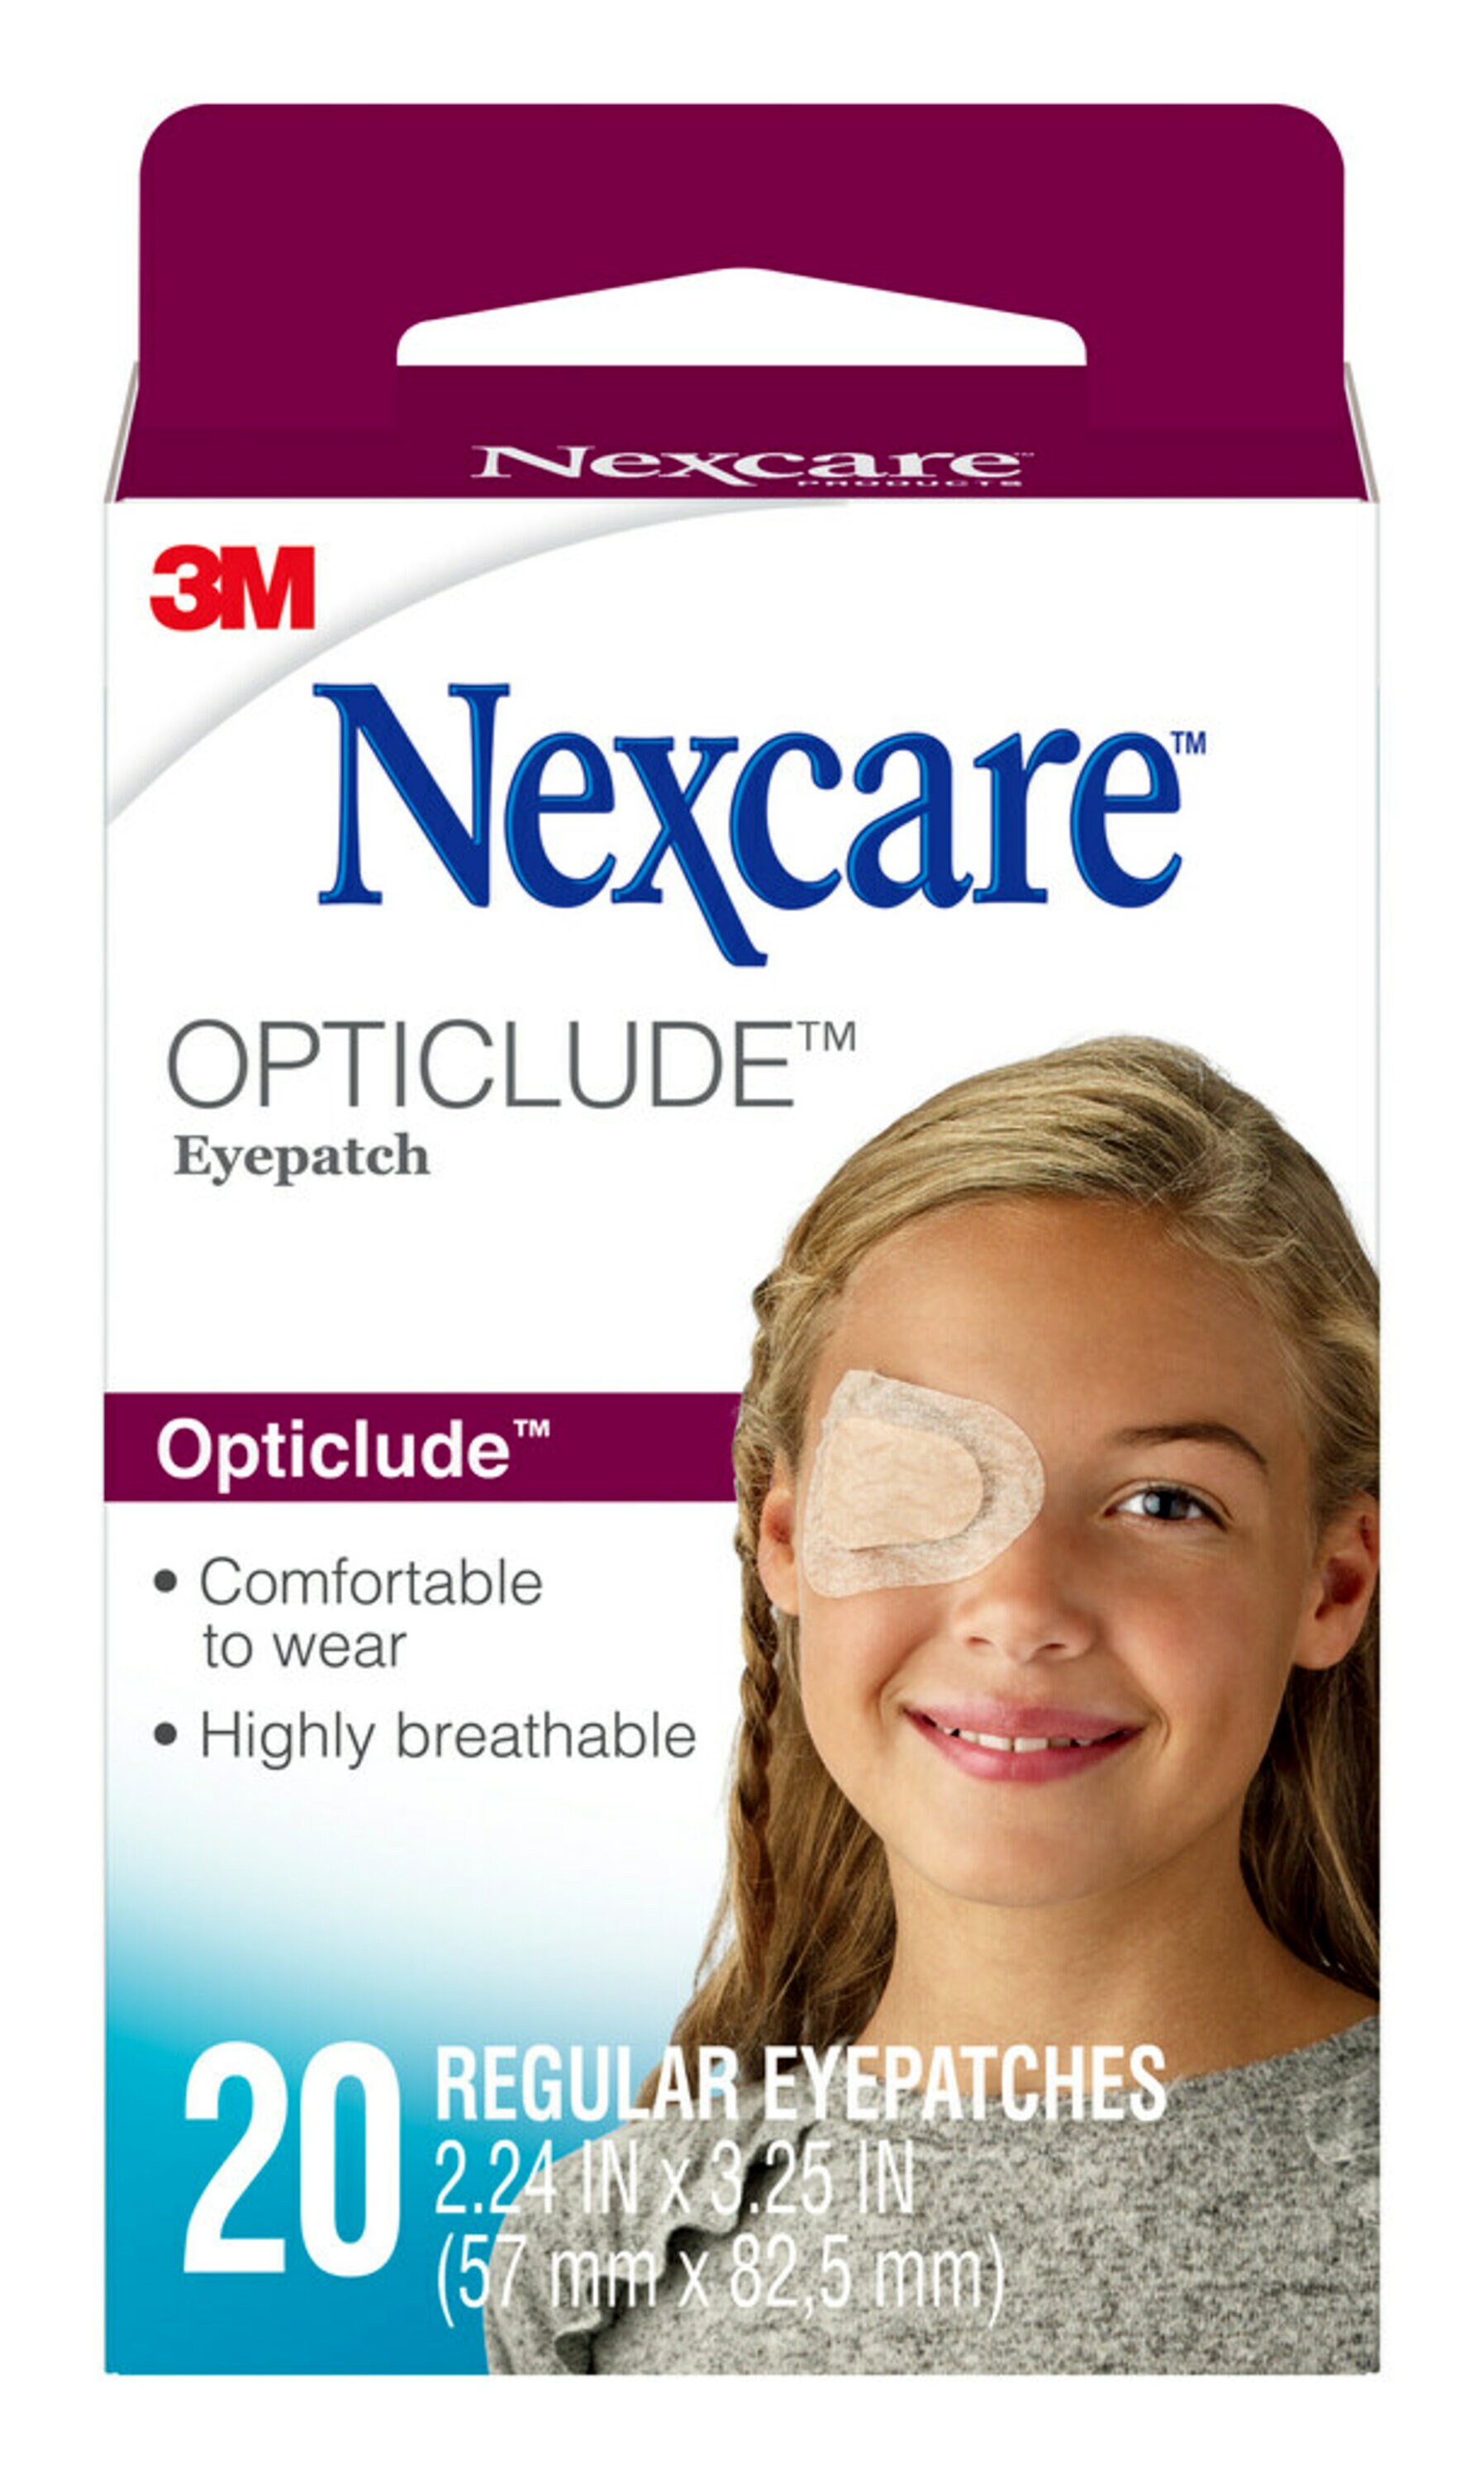 Nexcare Opticlude Comfort Eye Patch, Nude, Breathable, 20 Count - image 1 of 8